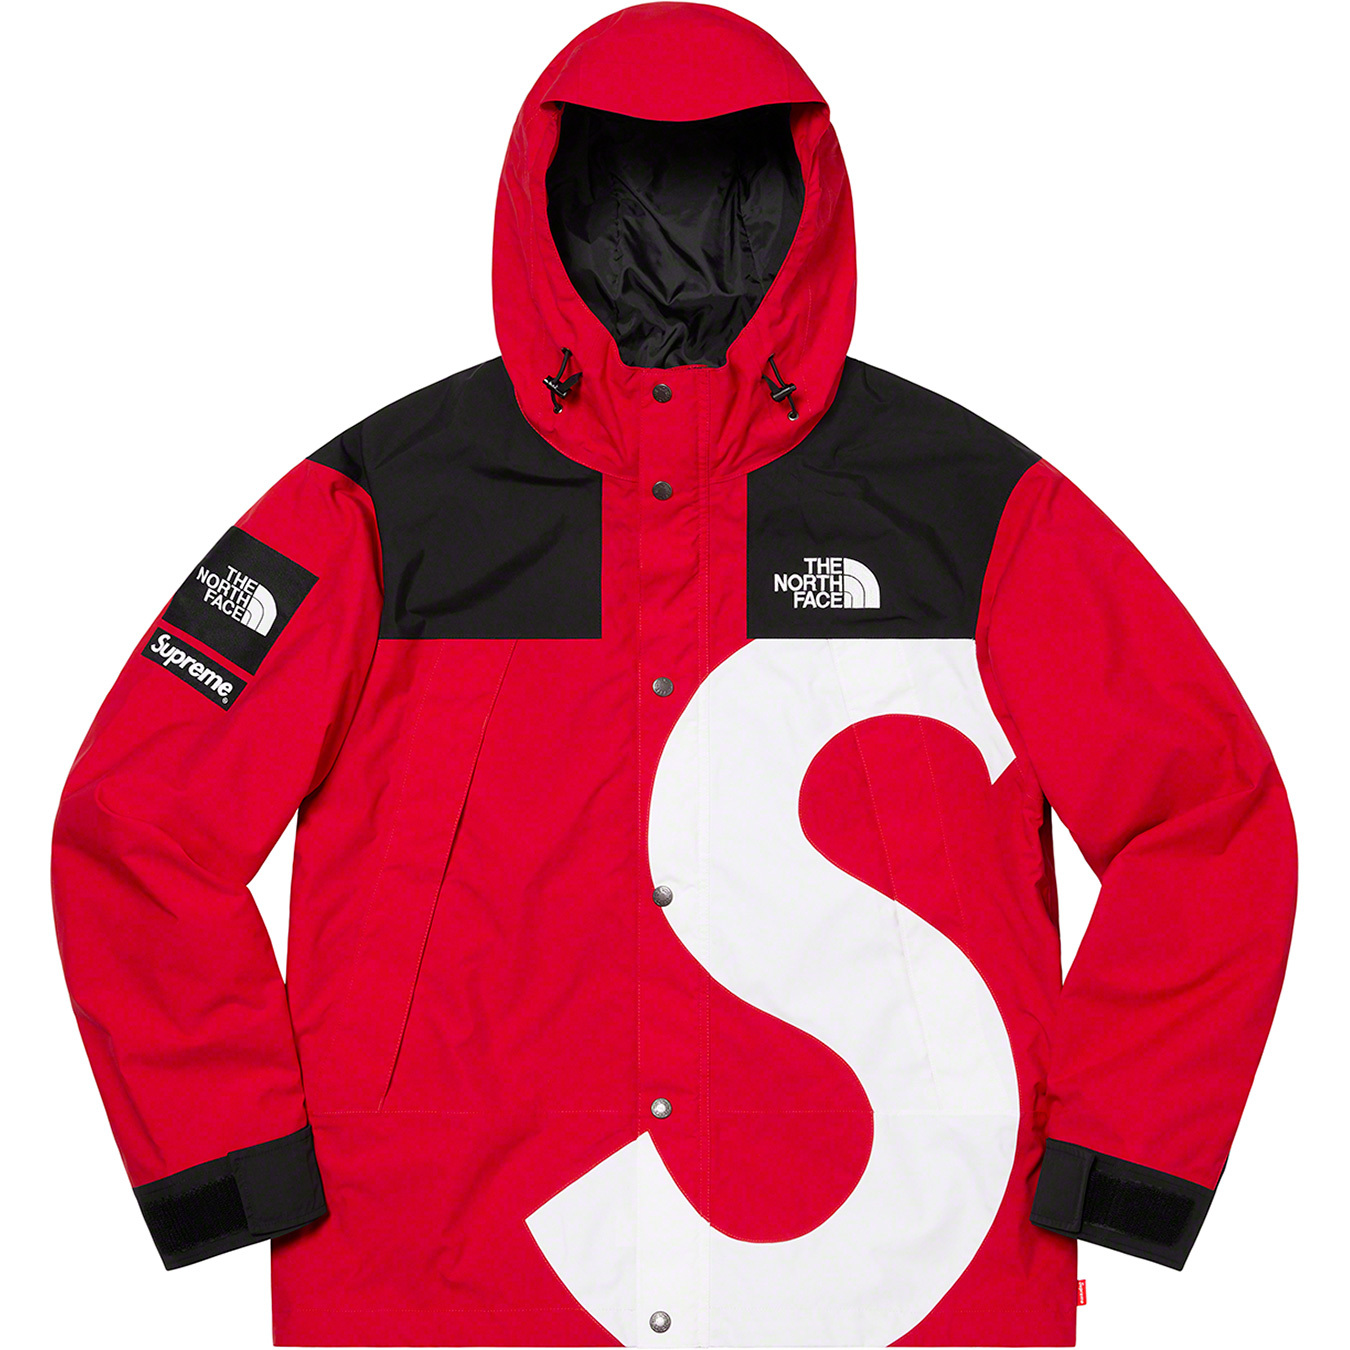 Supreme®/The North Face® S Logo Mountain Jacket